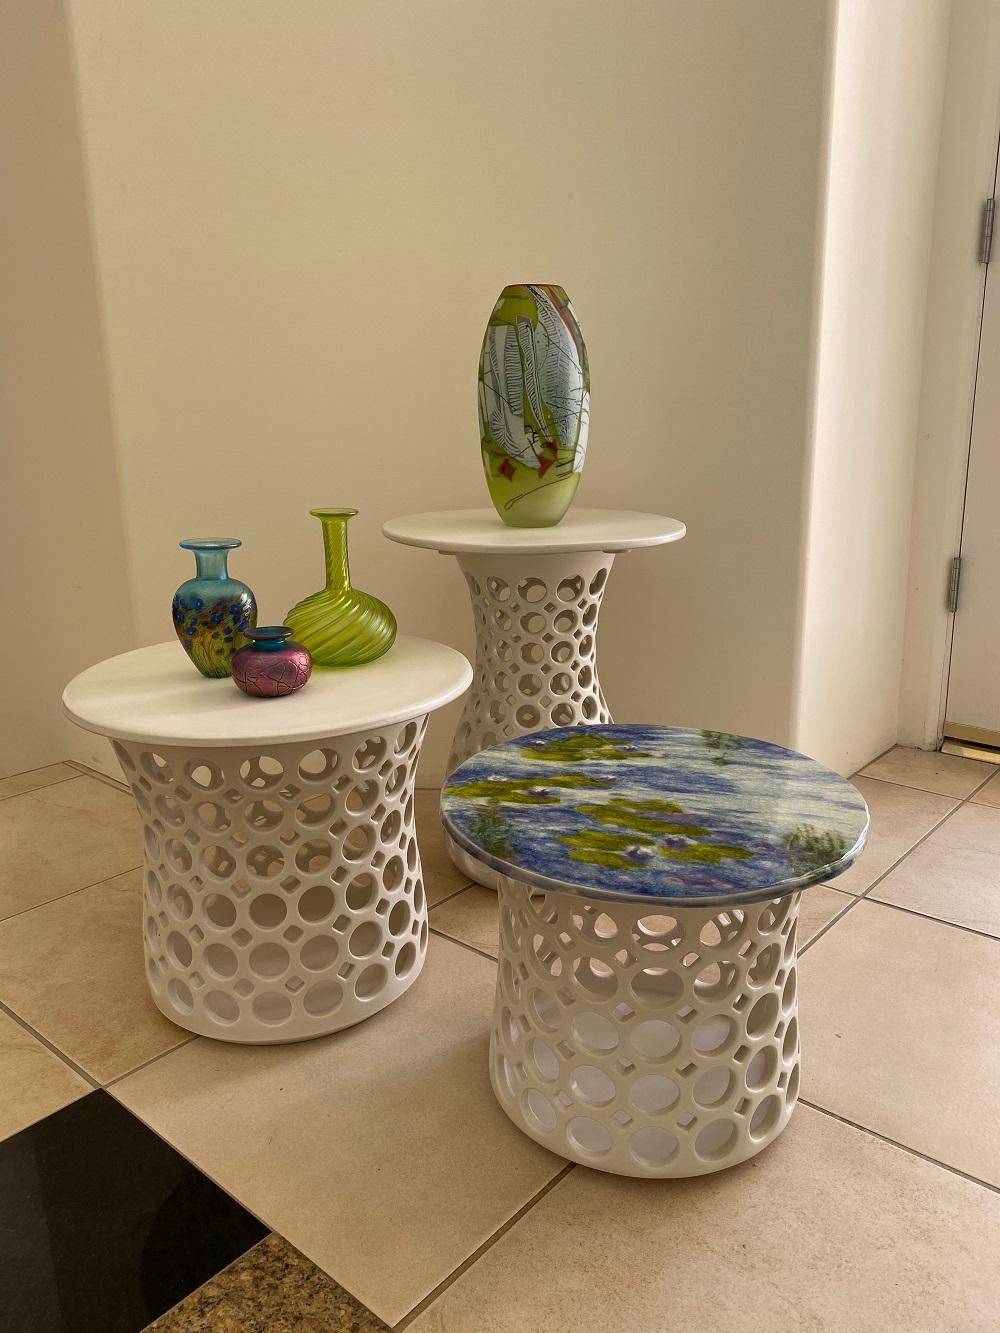 Inspired by Asian and impressionist painting, this pierced ceramic end table is a collaboration between ceramicist Lynne Meade and tile maker Sue Barry. Lynne's table base is wheel thrown and hand pierced stoneware with a satin glaze. Small holes